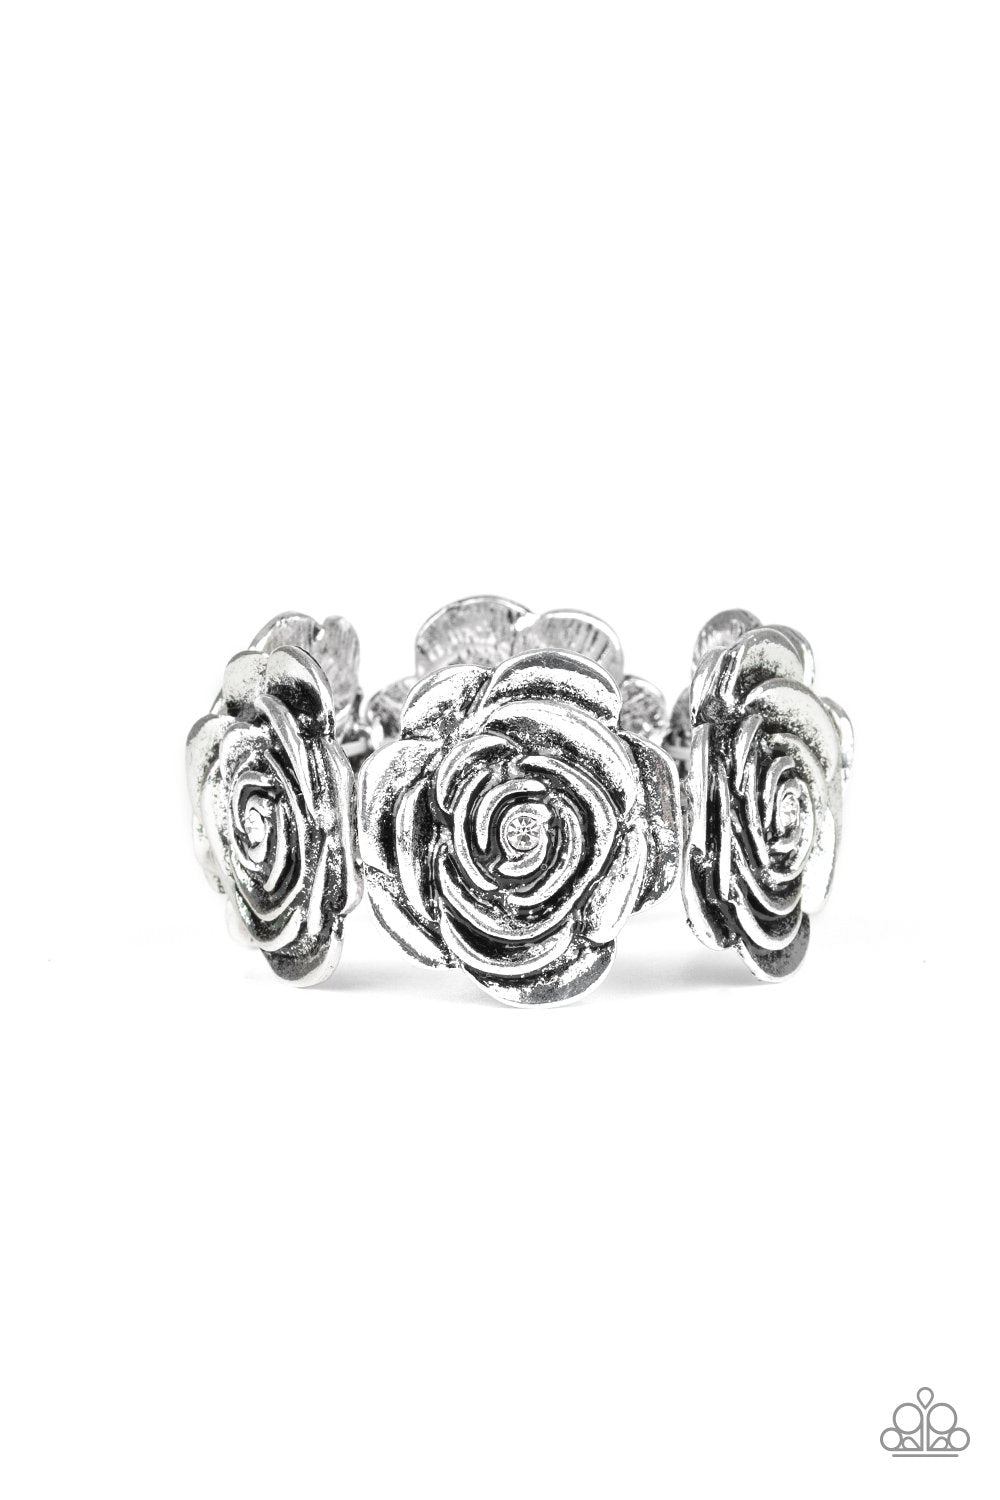 Floral Flamboyancy White and Silver Rose Stretch Bracelet - Paparazzi Accessories-CarasShop.com - $5 Jewelry by Cara Jewels